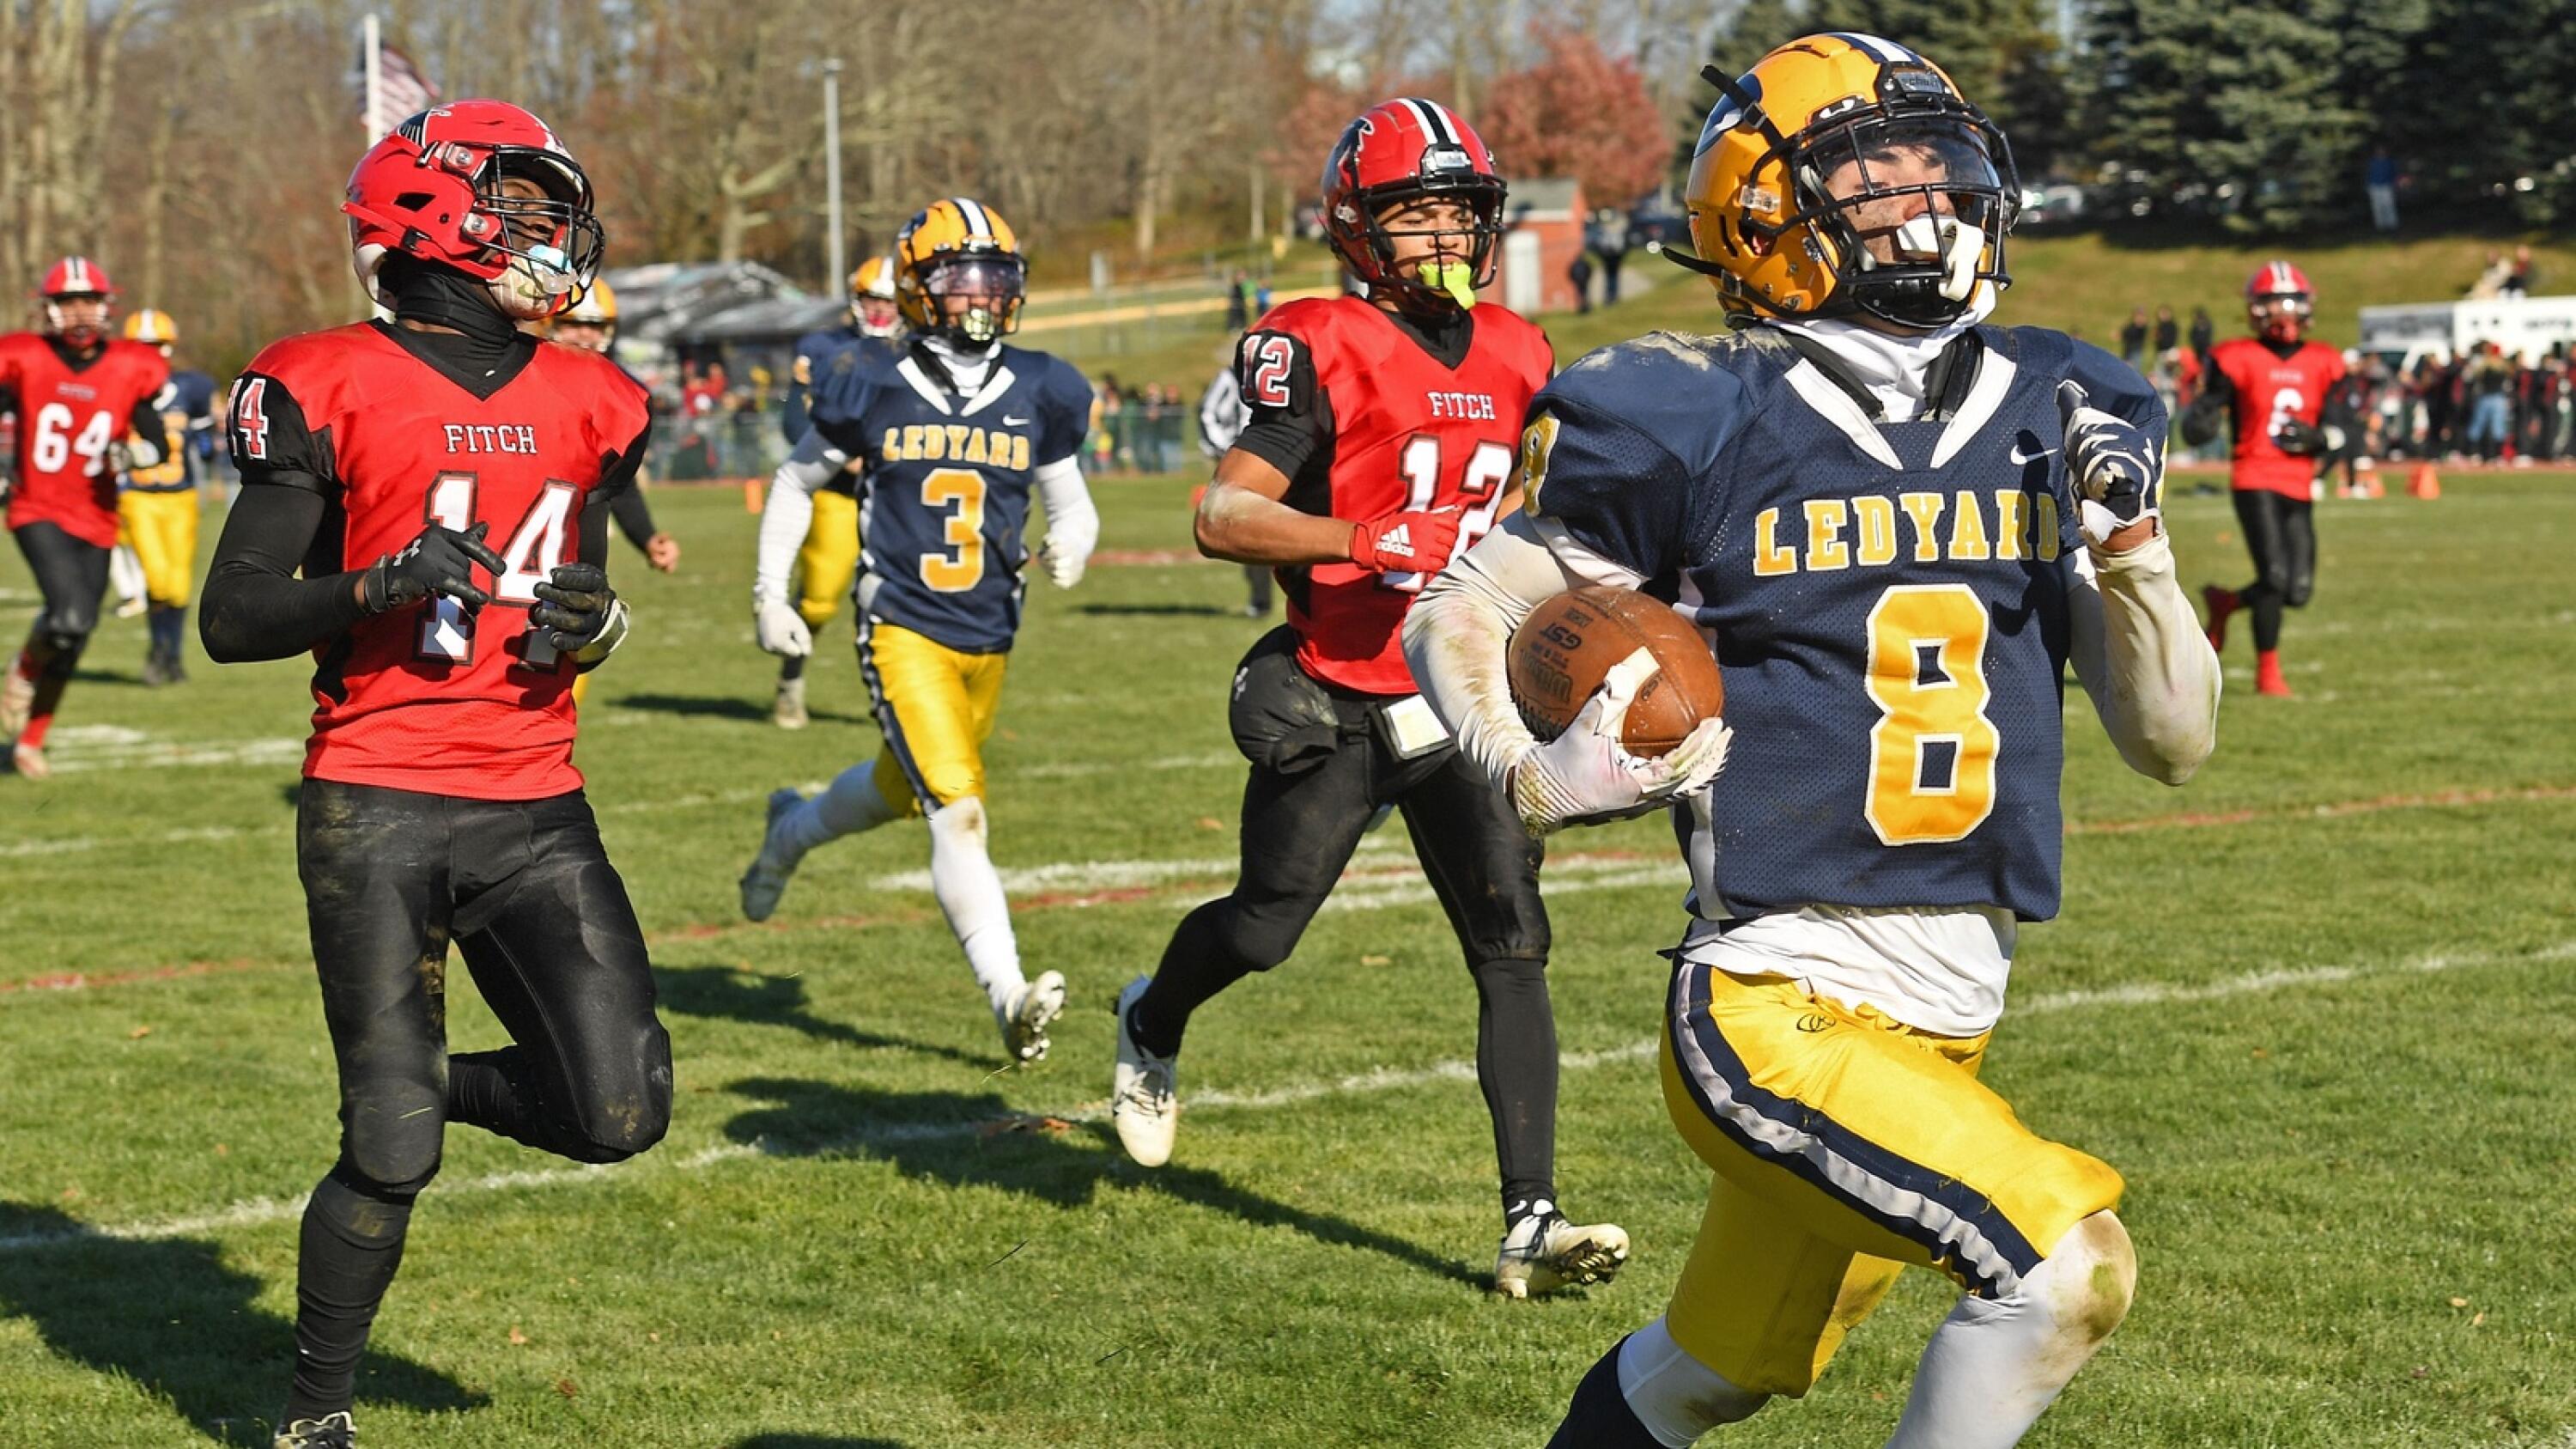 Thames River, Ledyard, Valley/OL anxious to get postseason journeys started